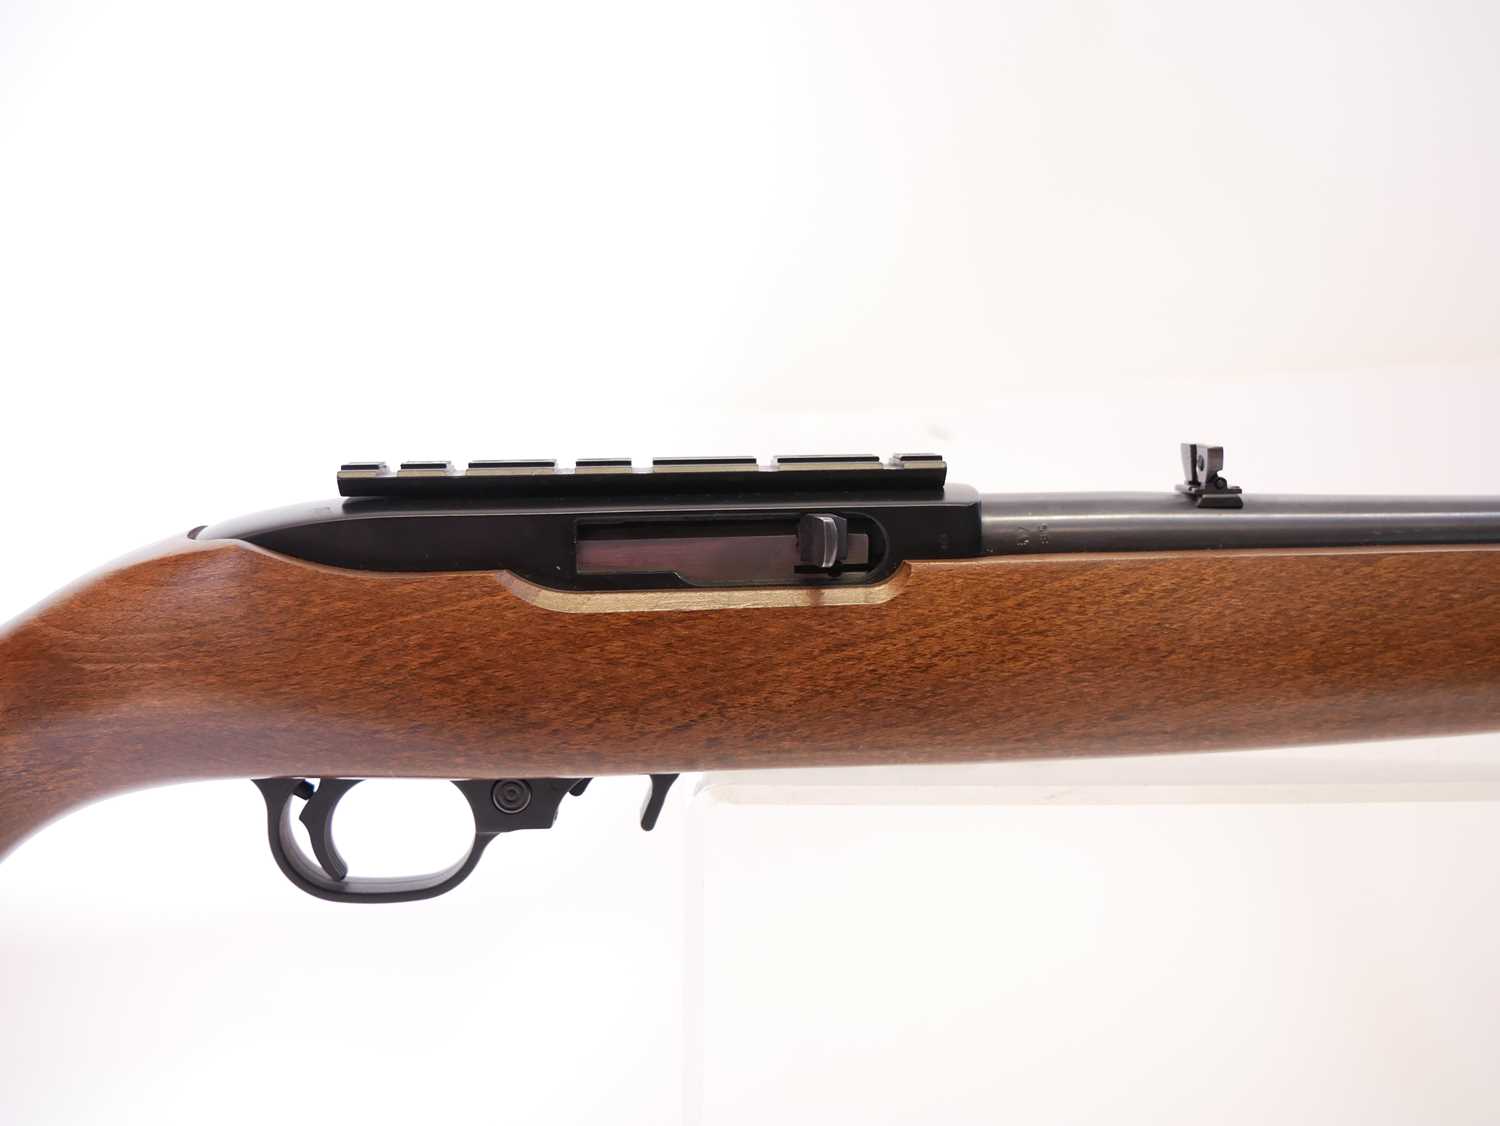 Ruger 10-22 .22lr semi auto rifle and moderator, serial number 356-73813, 16.5inch barrel fitted - Image 4 of 11